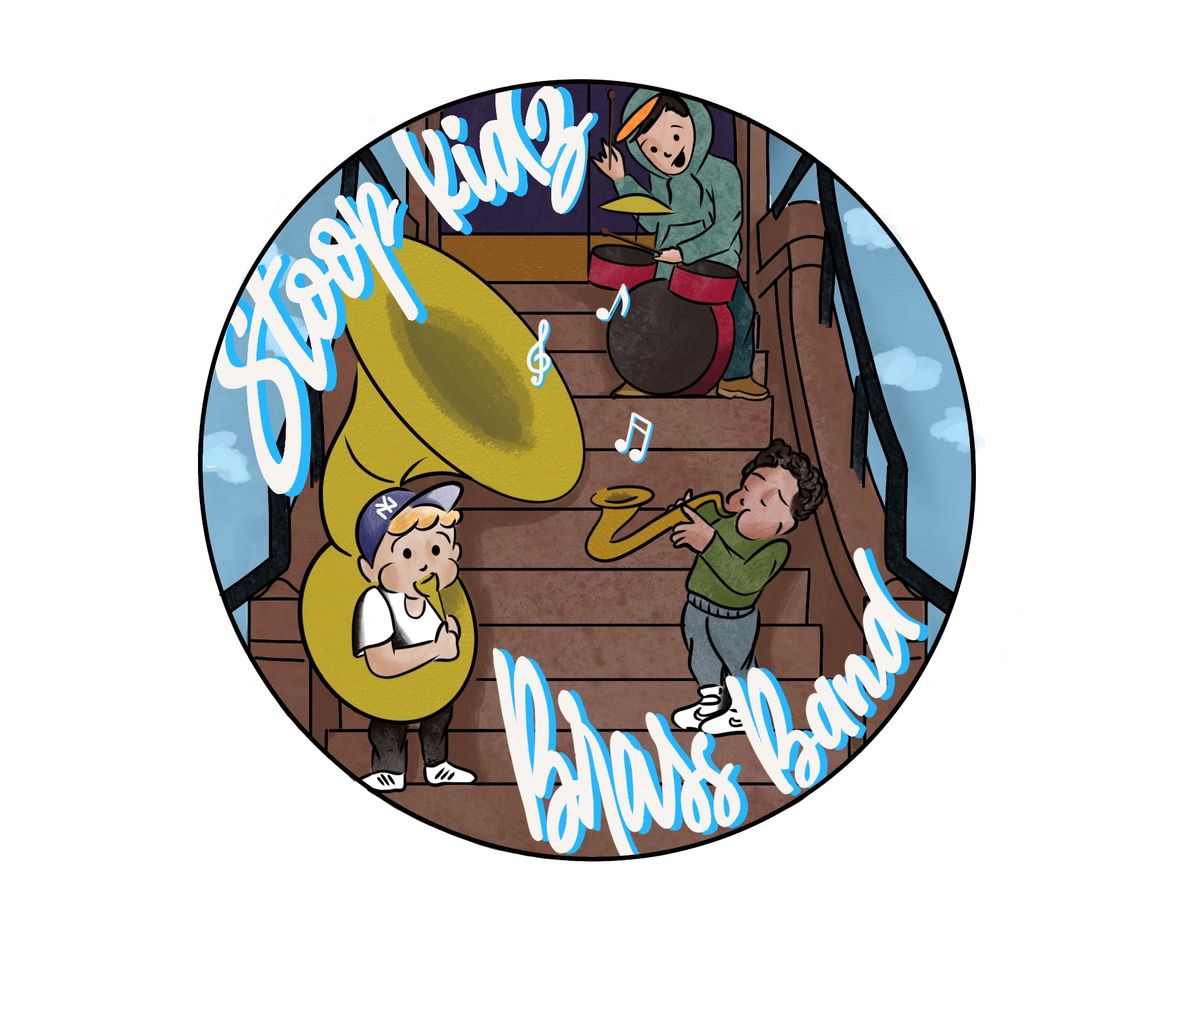 Stoop Kidz Brass Band + The Baxbys at The Stone Church